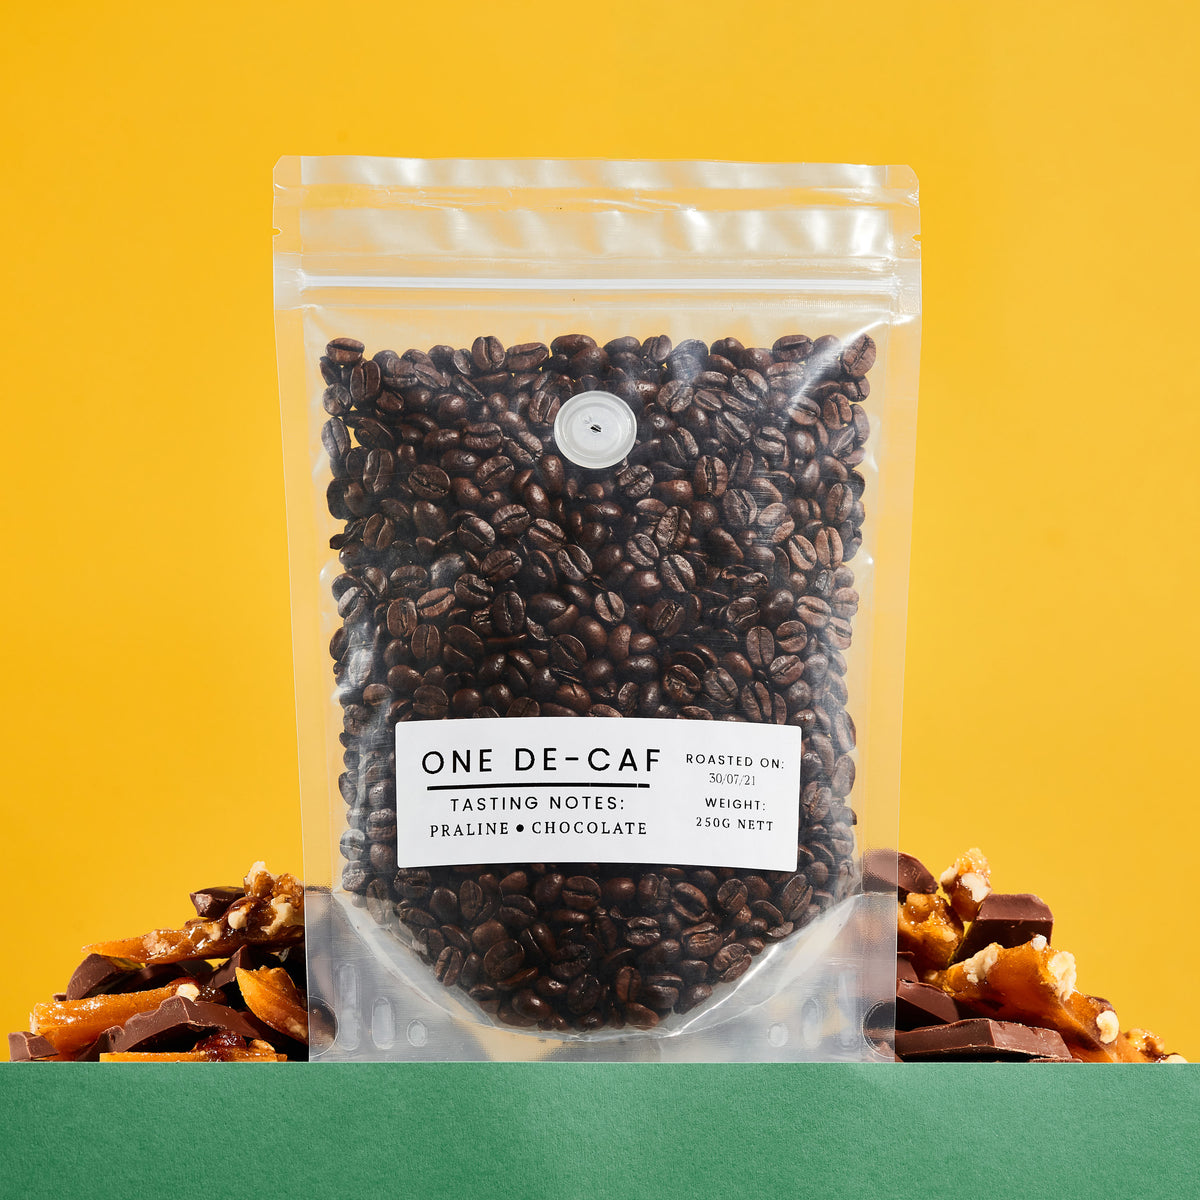 Decaf coffee with tasting notes praline and chocolate buy coffee online